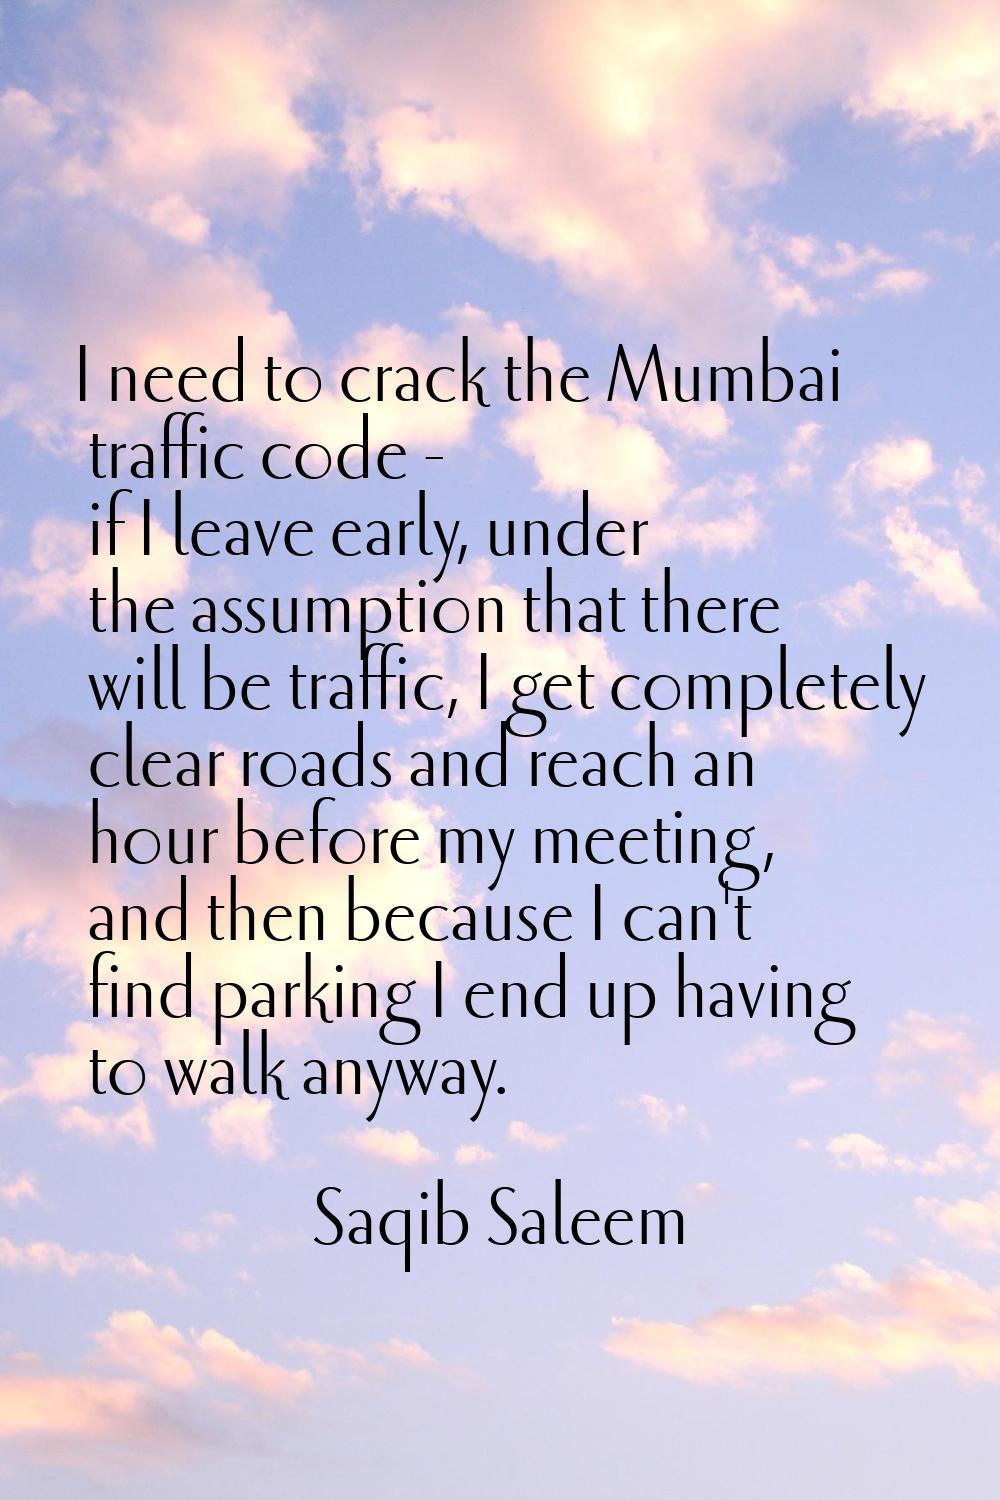 I need to crack the Mumbai traffic code - if I leave early, under the assumption that there will be